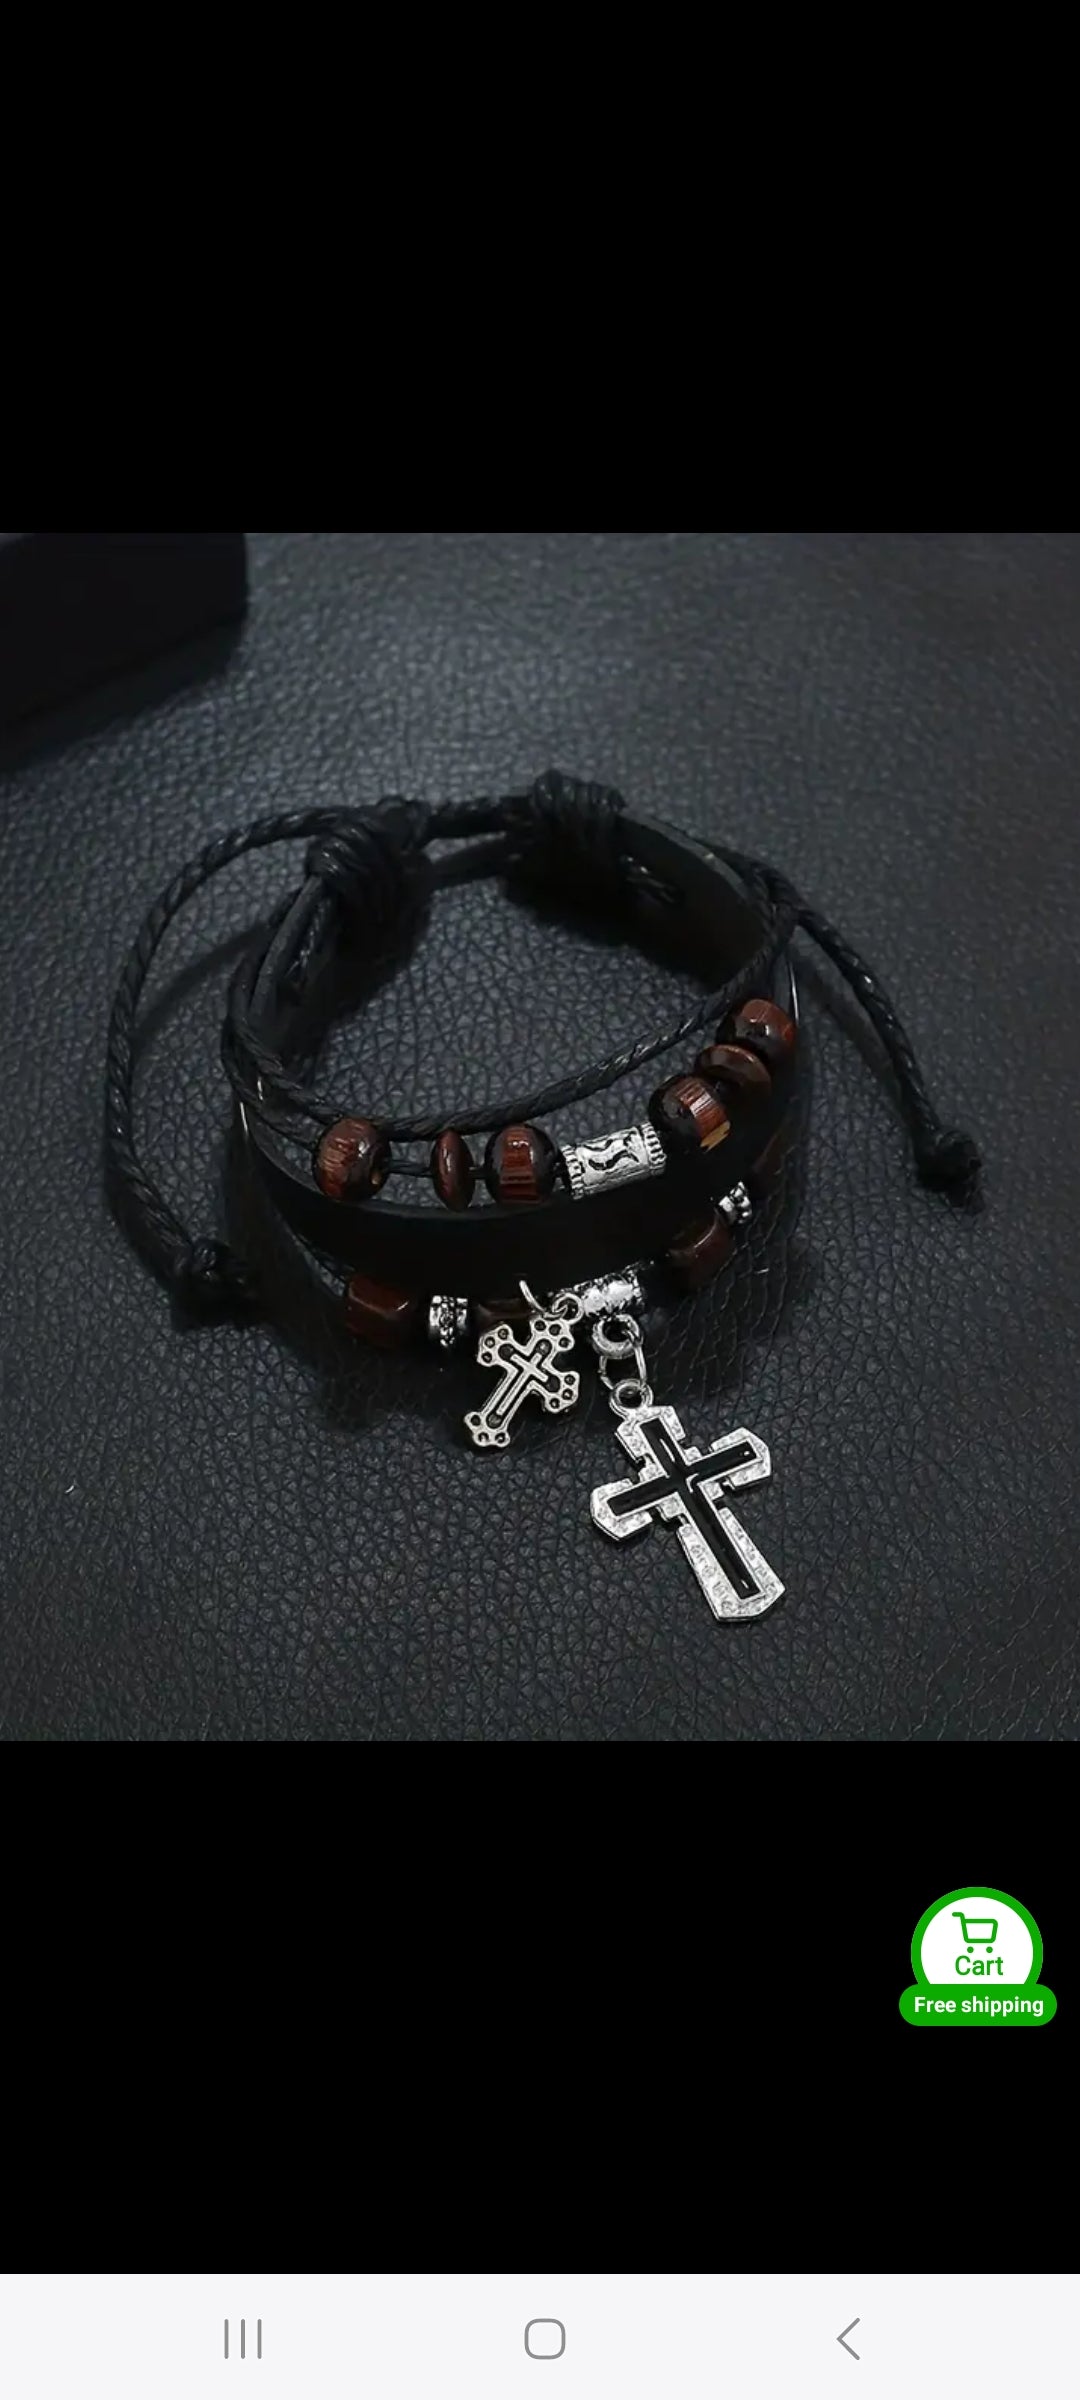 Black PU leather bracelet with 2 crosses and beads